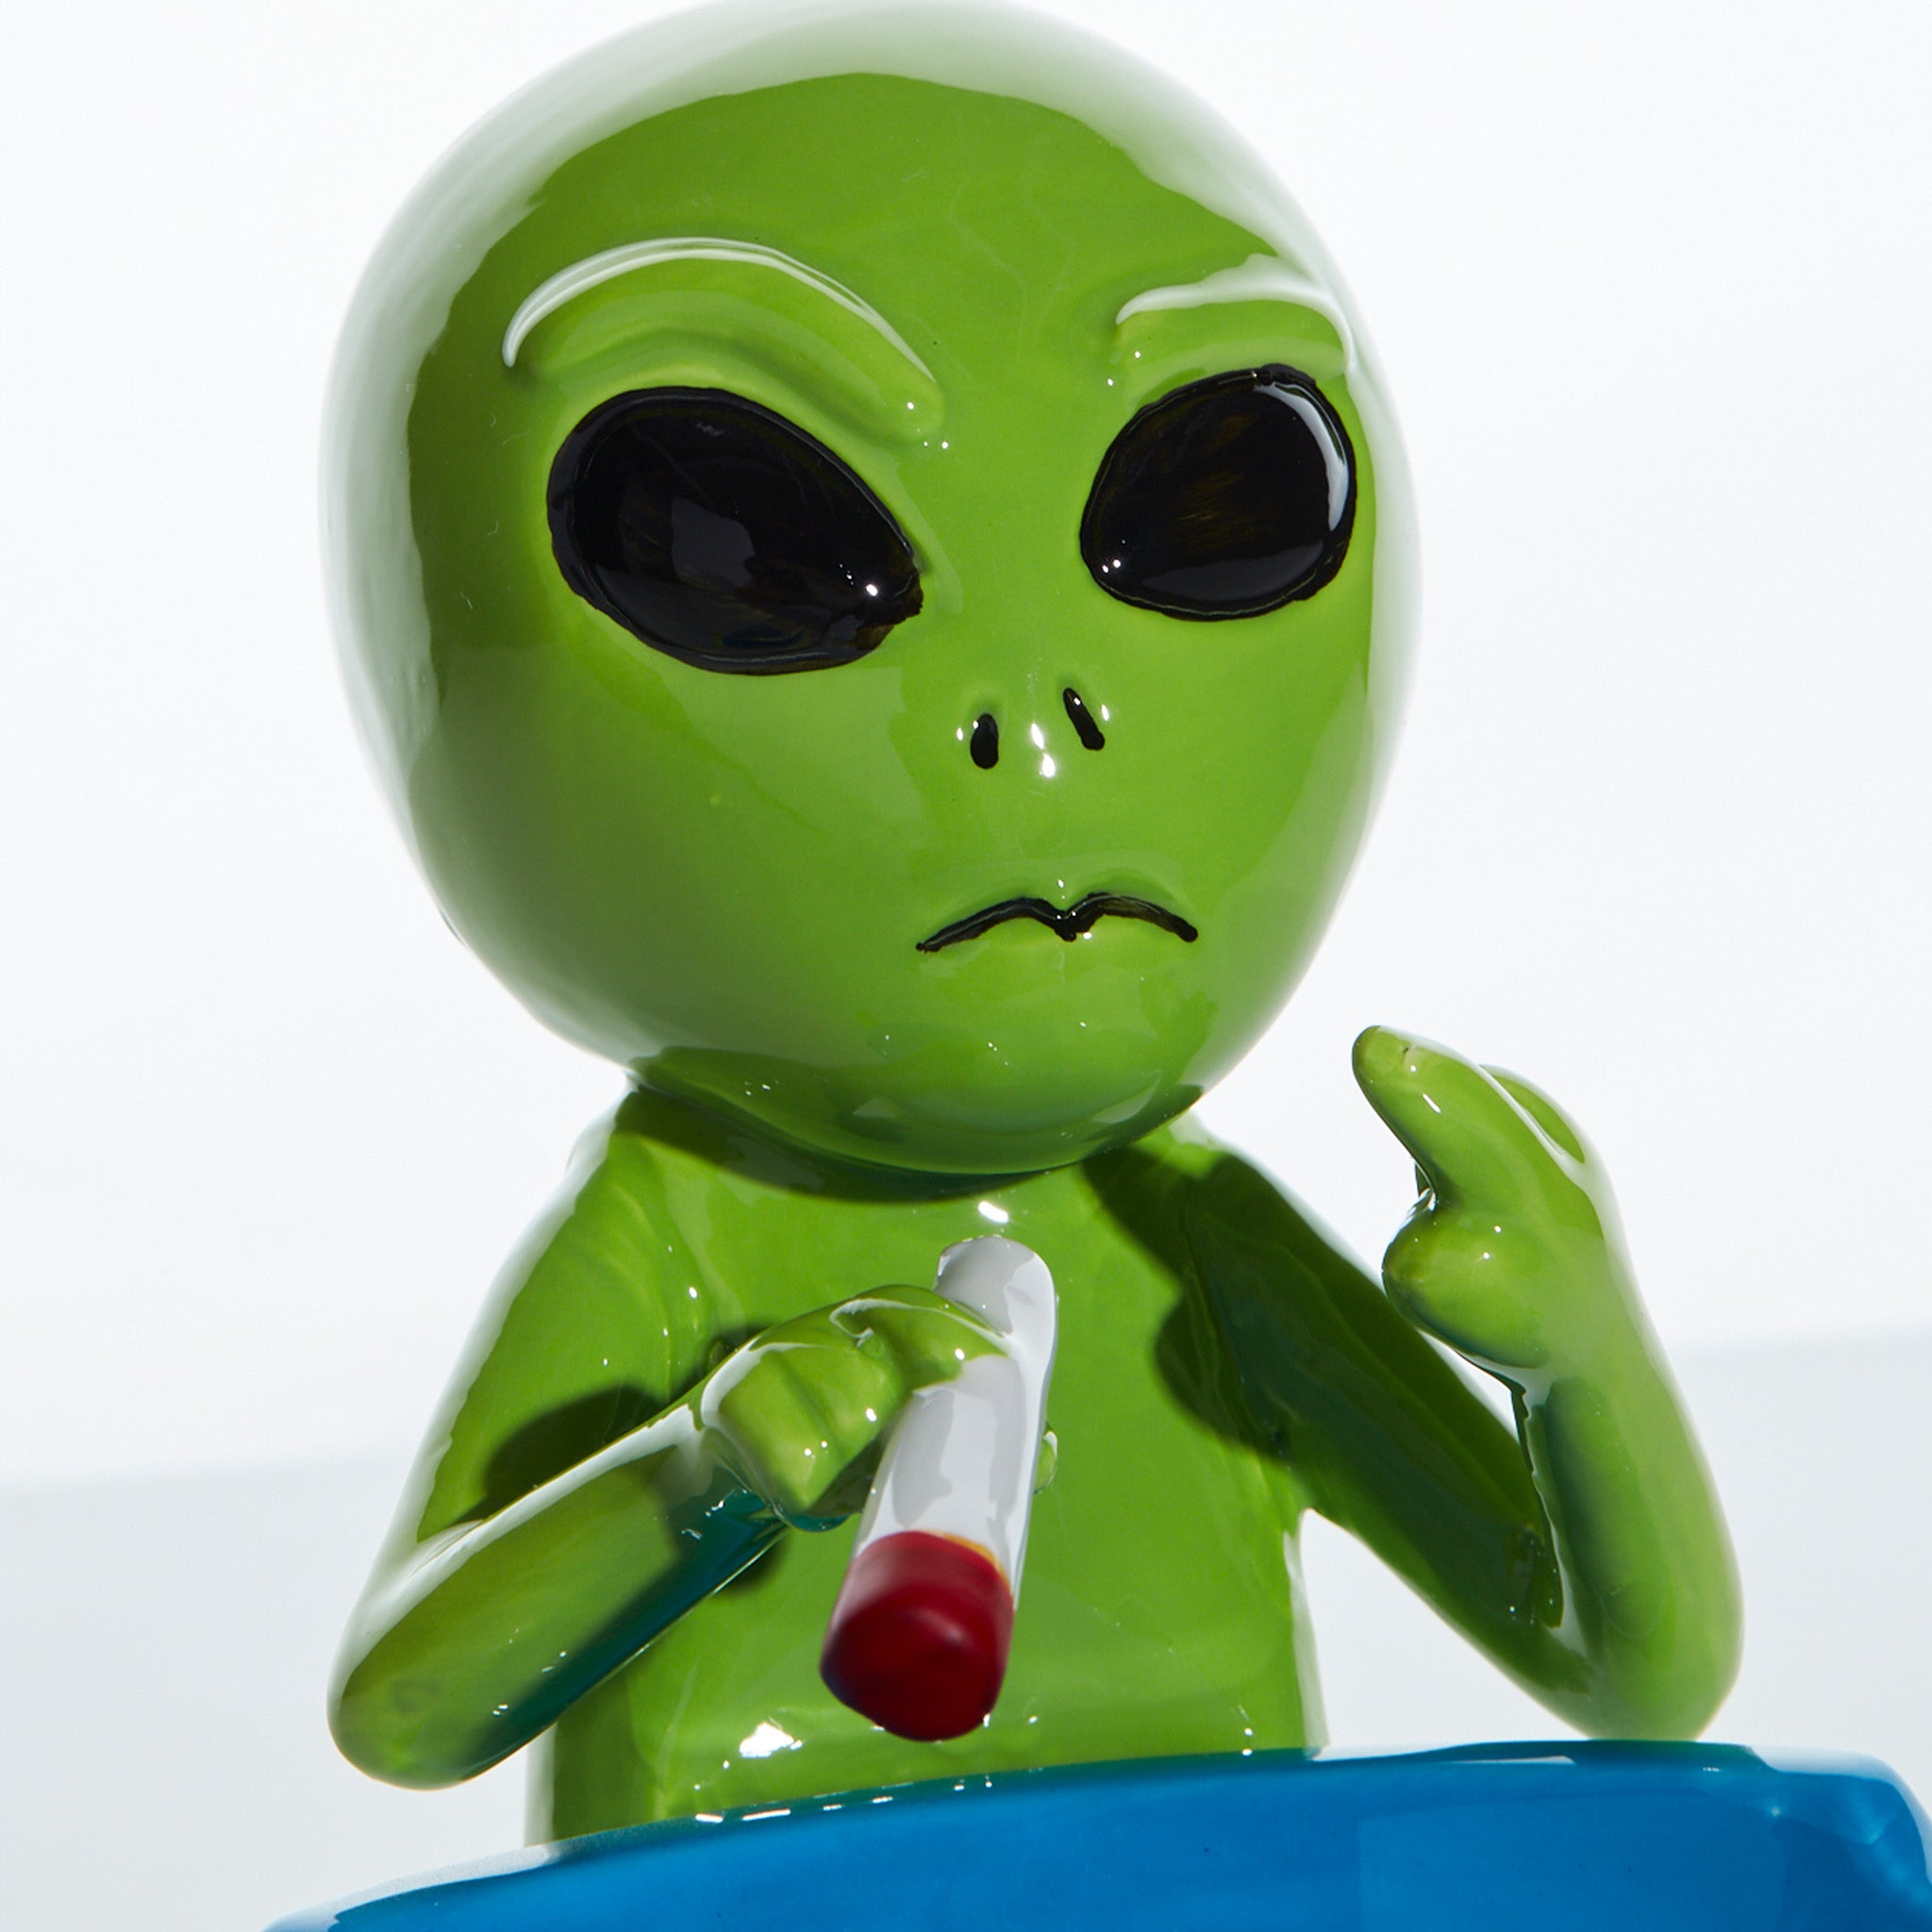 RipNDip We Out Here Alien Ash Tray